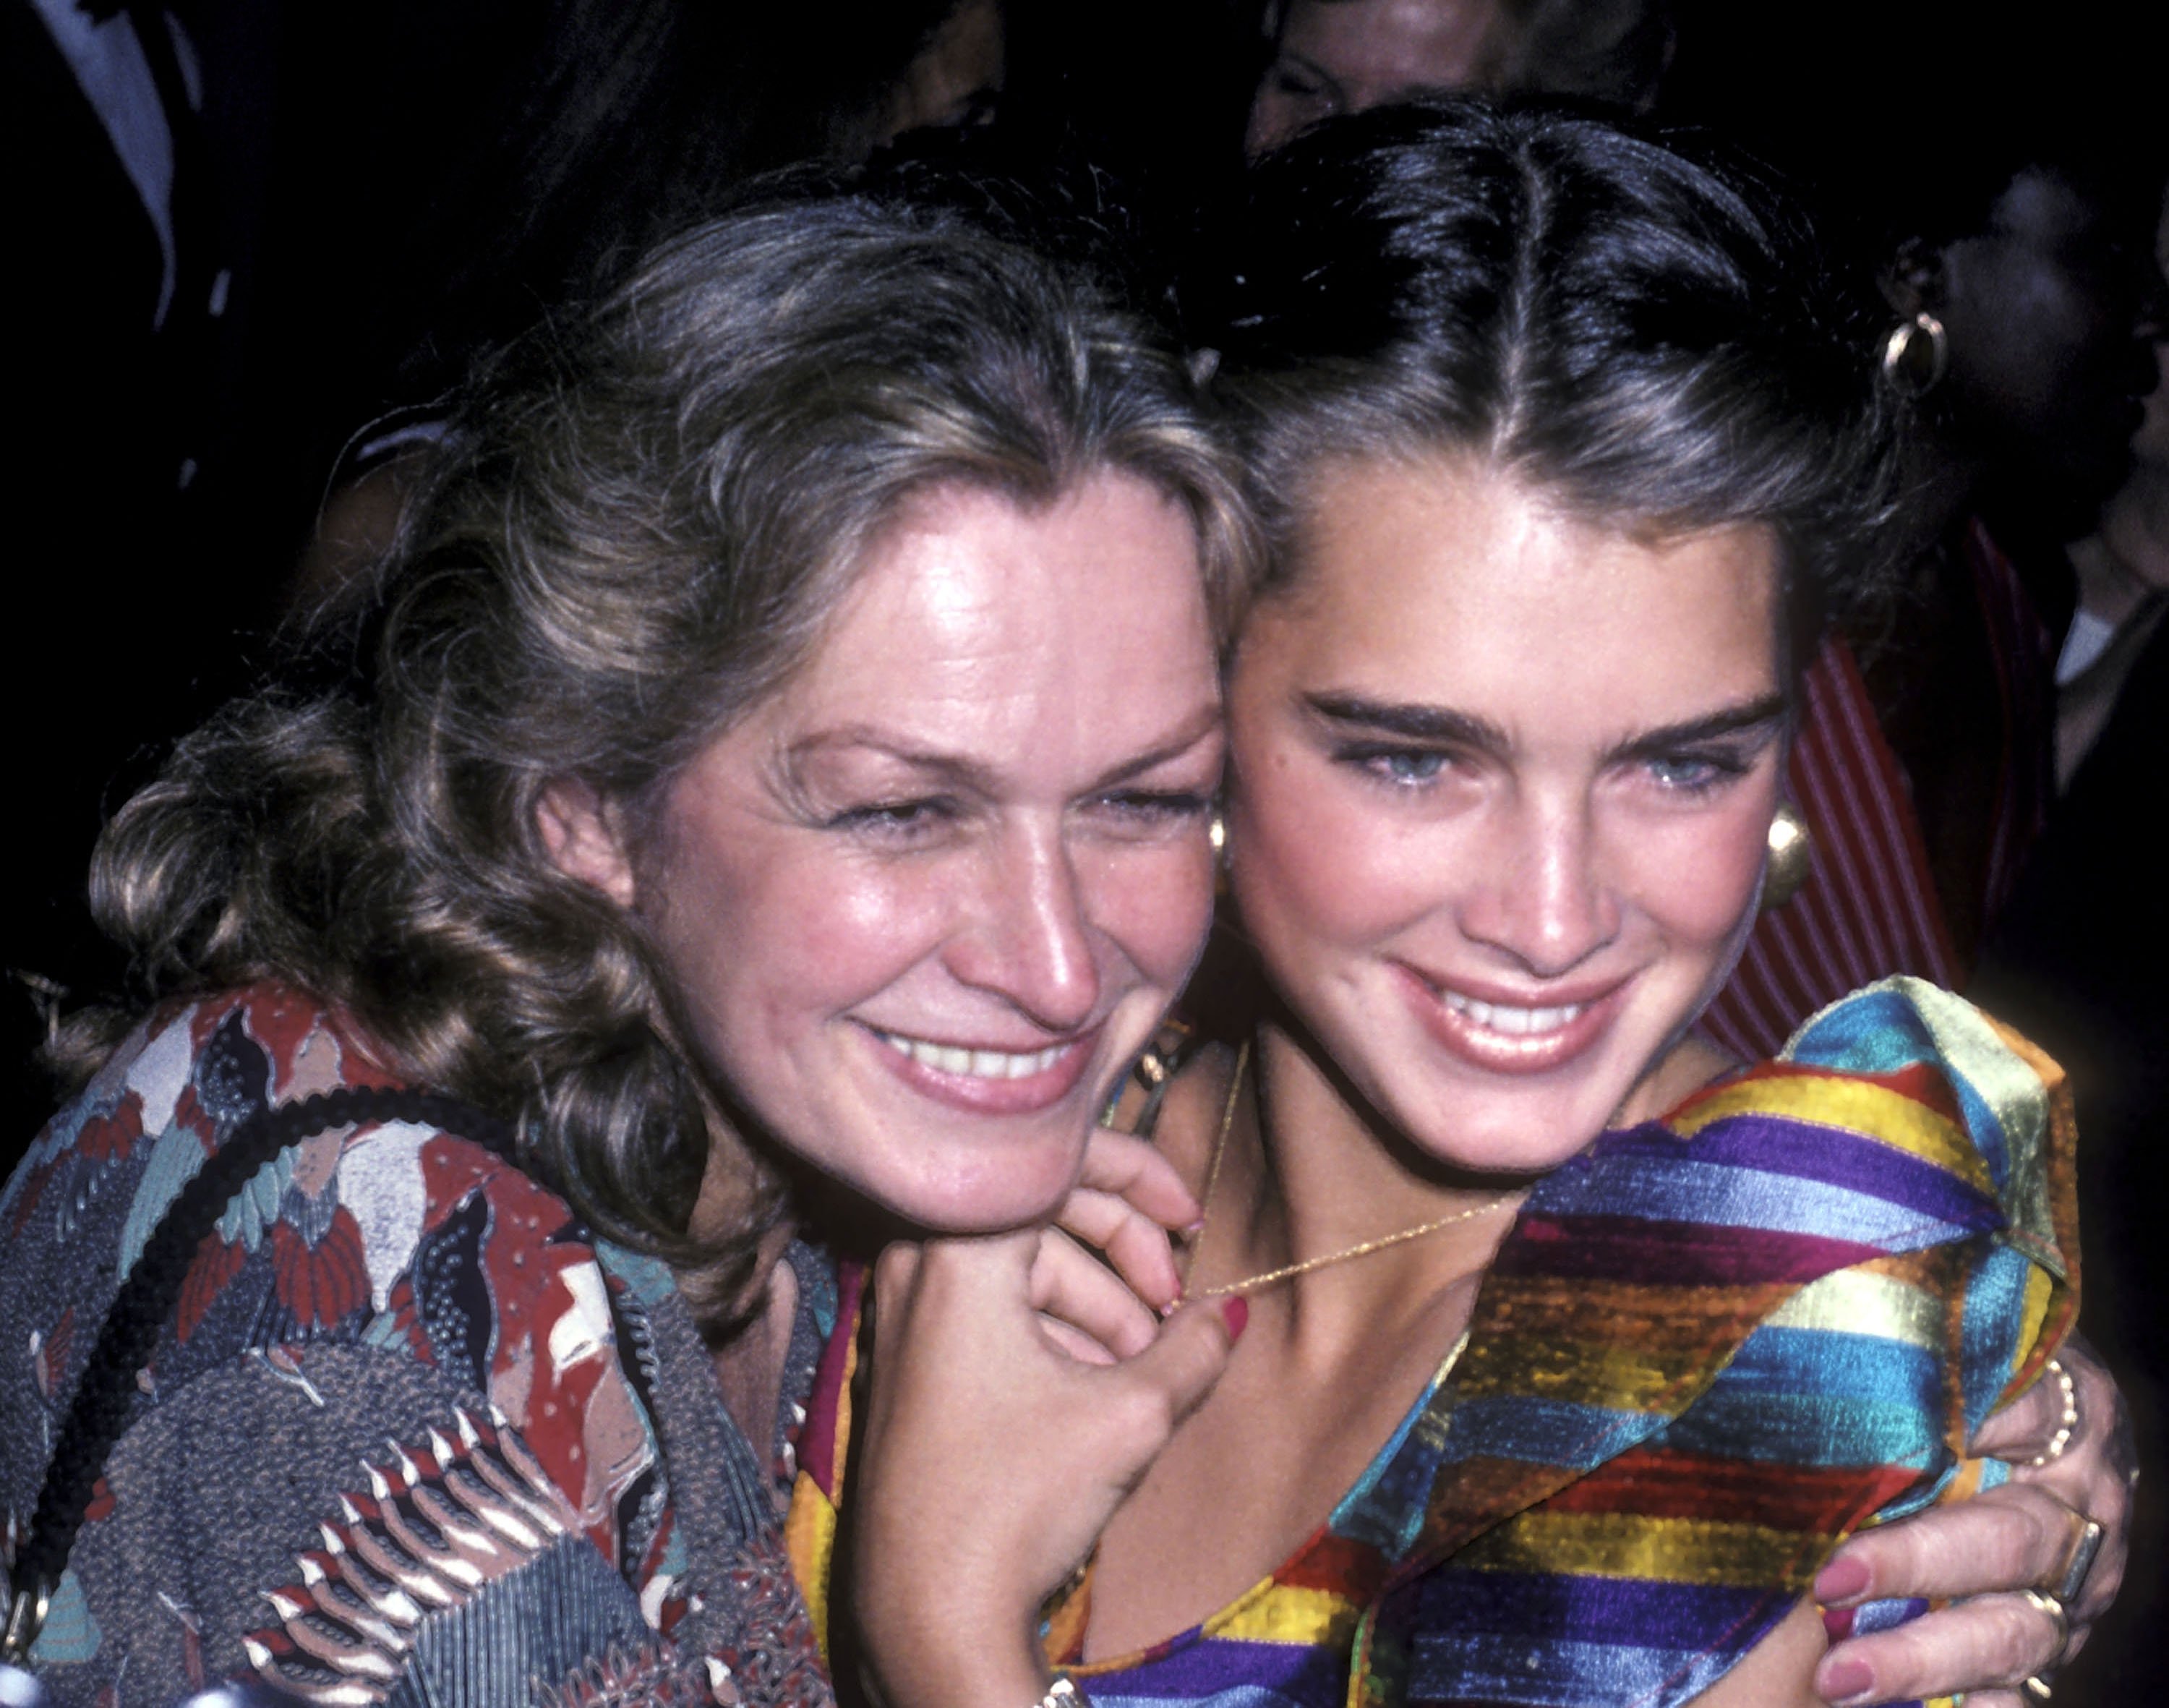 Brooke Shields and Teri Shields during the "Endless Love" premiere party at Hisae Restaurant on July 16, 1981 in New York City. / Source: Getty Images